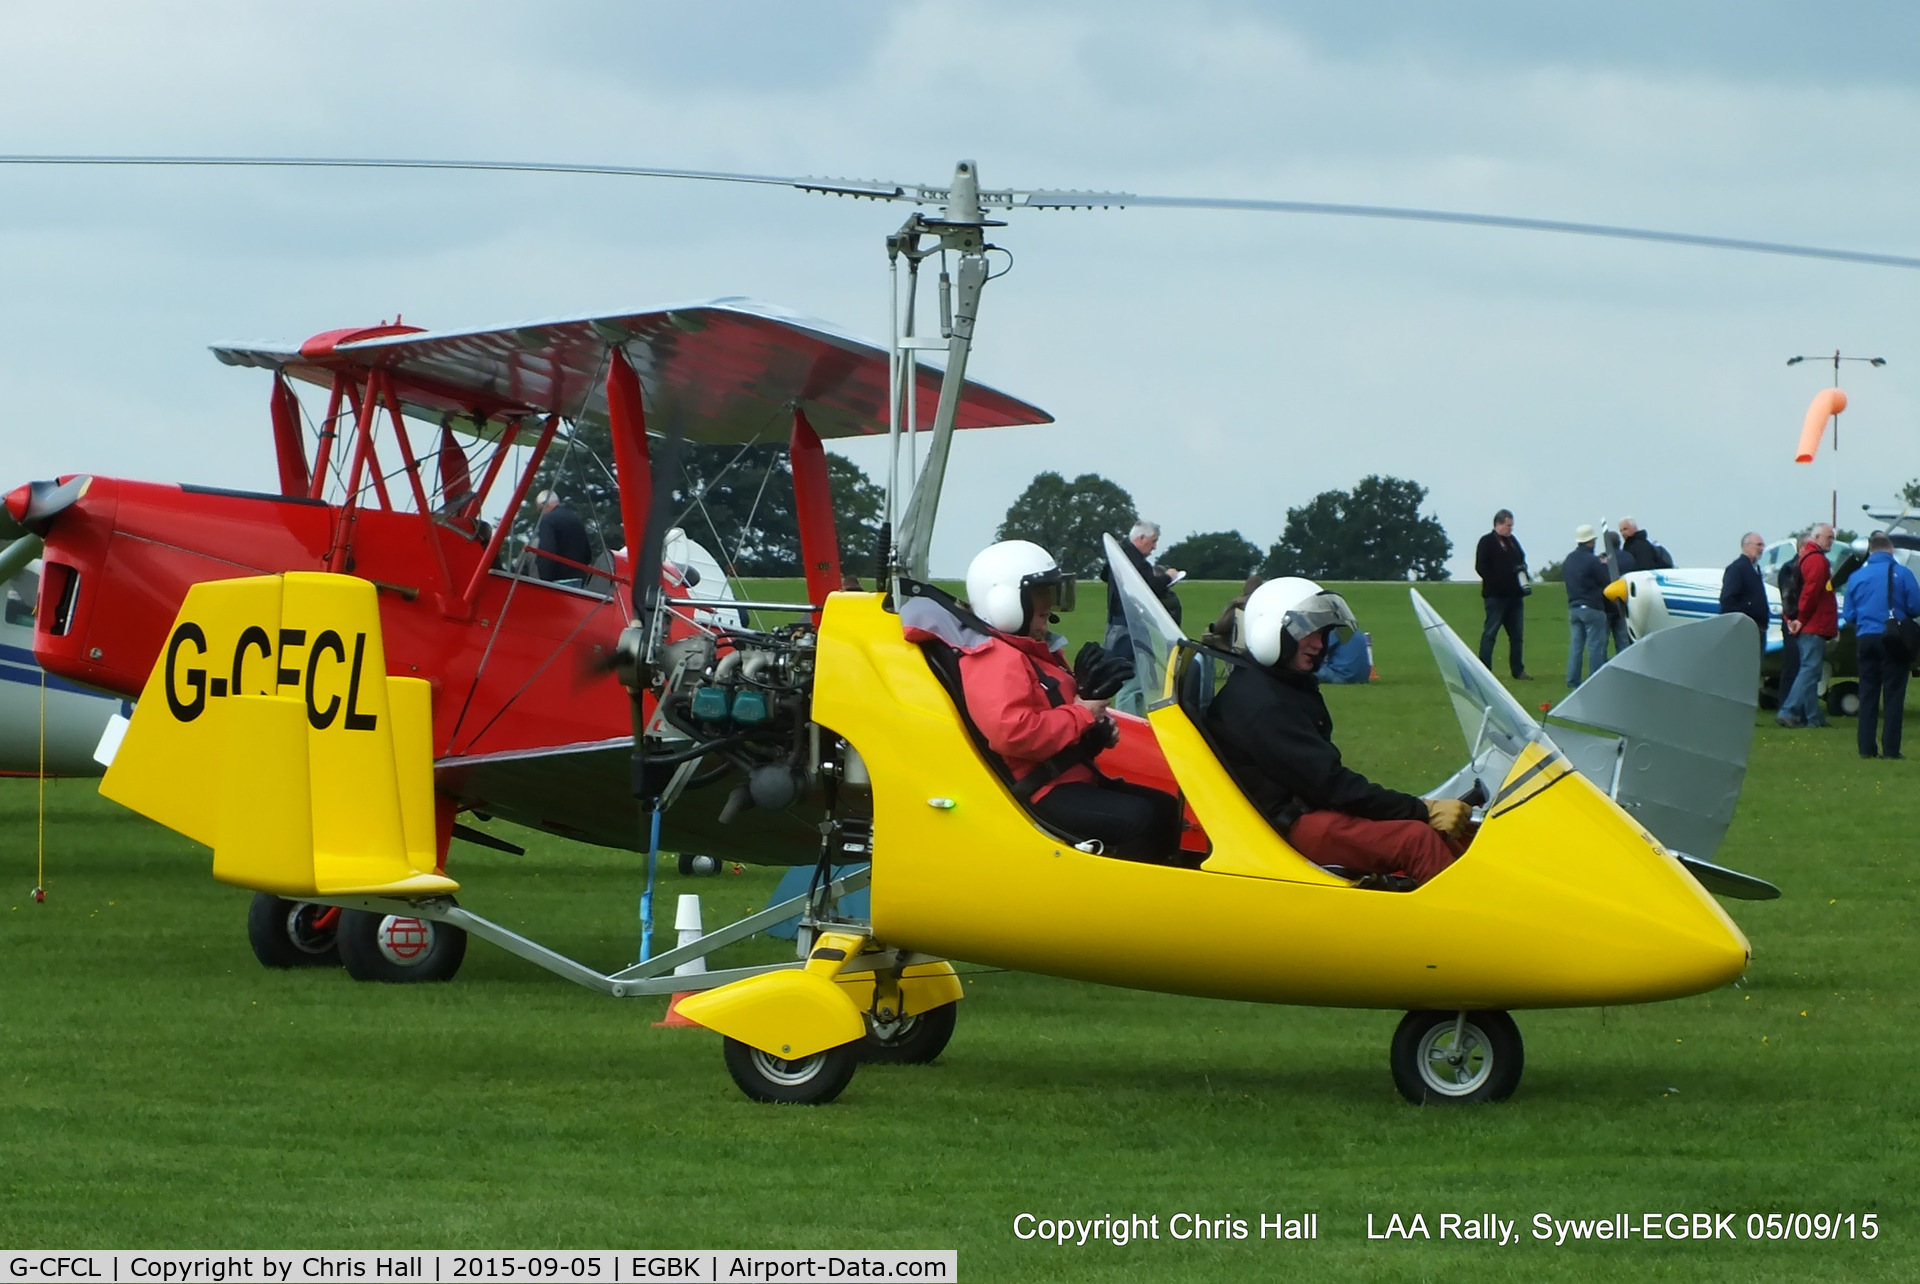 G-CFCL, 2008 Rotorsport UK MT-03 C/N RSUK/MT-03/043, at the LAA Rally 2015, Sywell